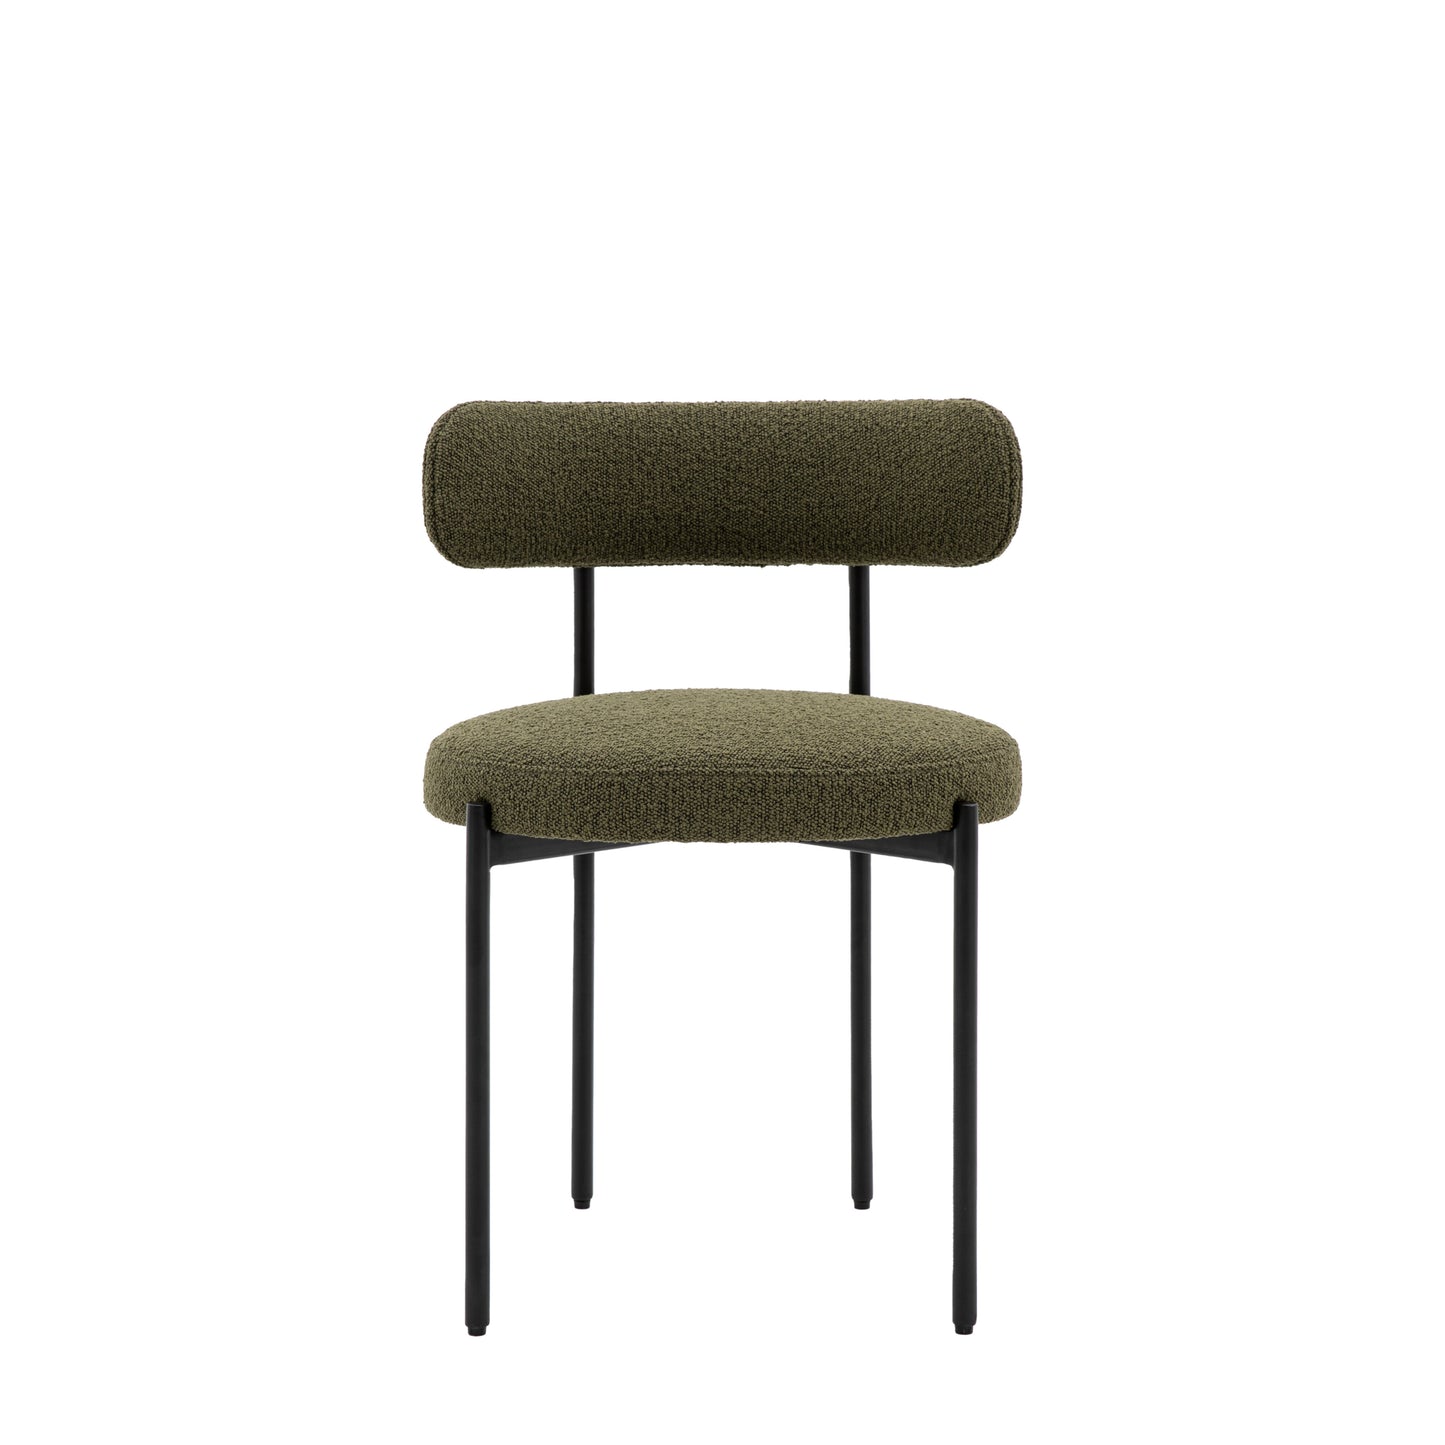 Remi Metal And Fabric Dining Chair | Green (2 Pack)